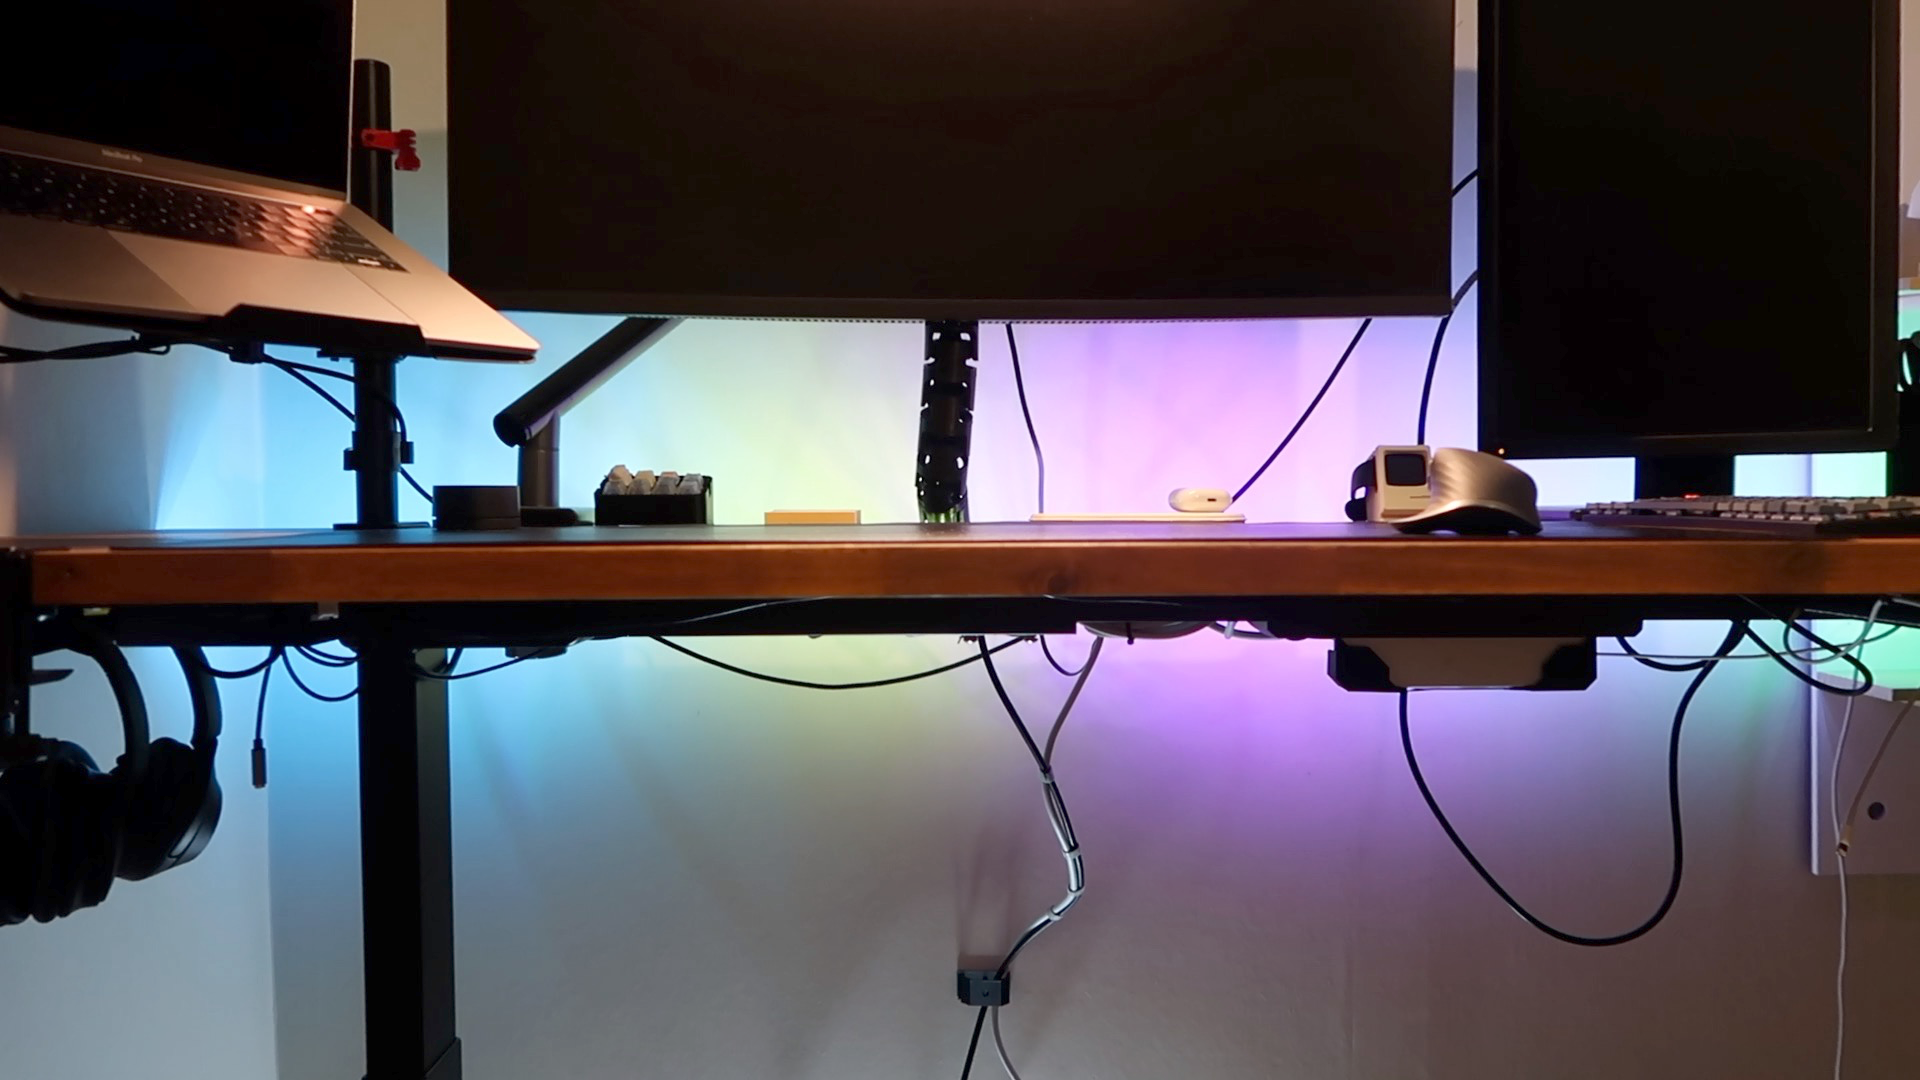 The cable management under the desk